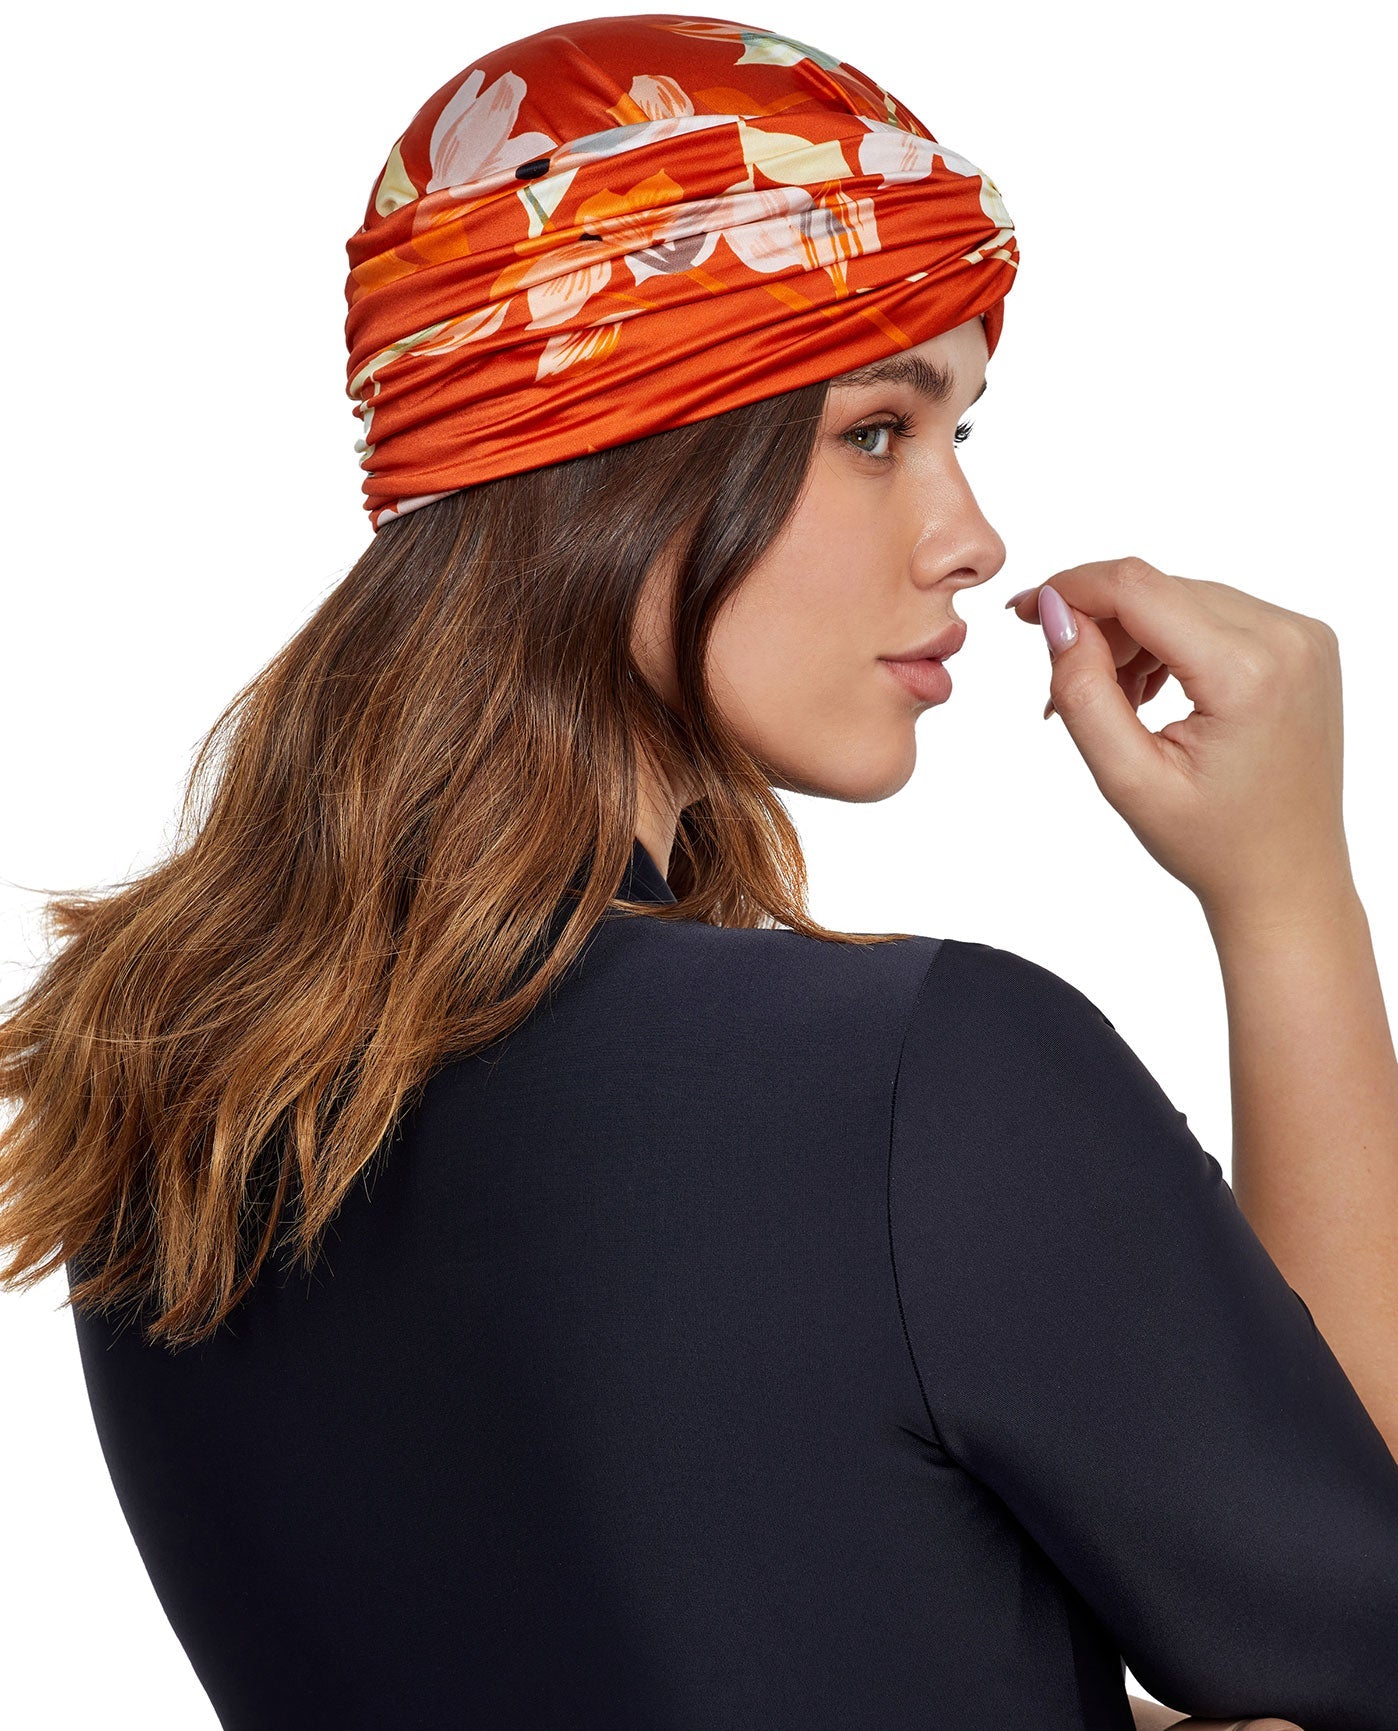 Back View Of Gottex Modest Knotted Hair Covering | GOTTEX MODEST AMORE SPICE